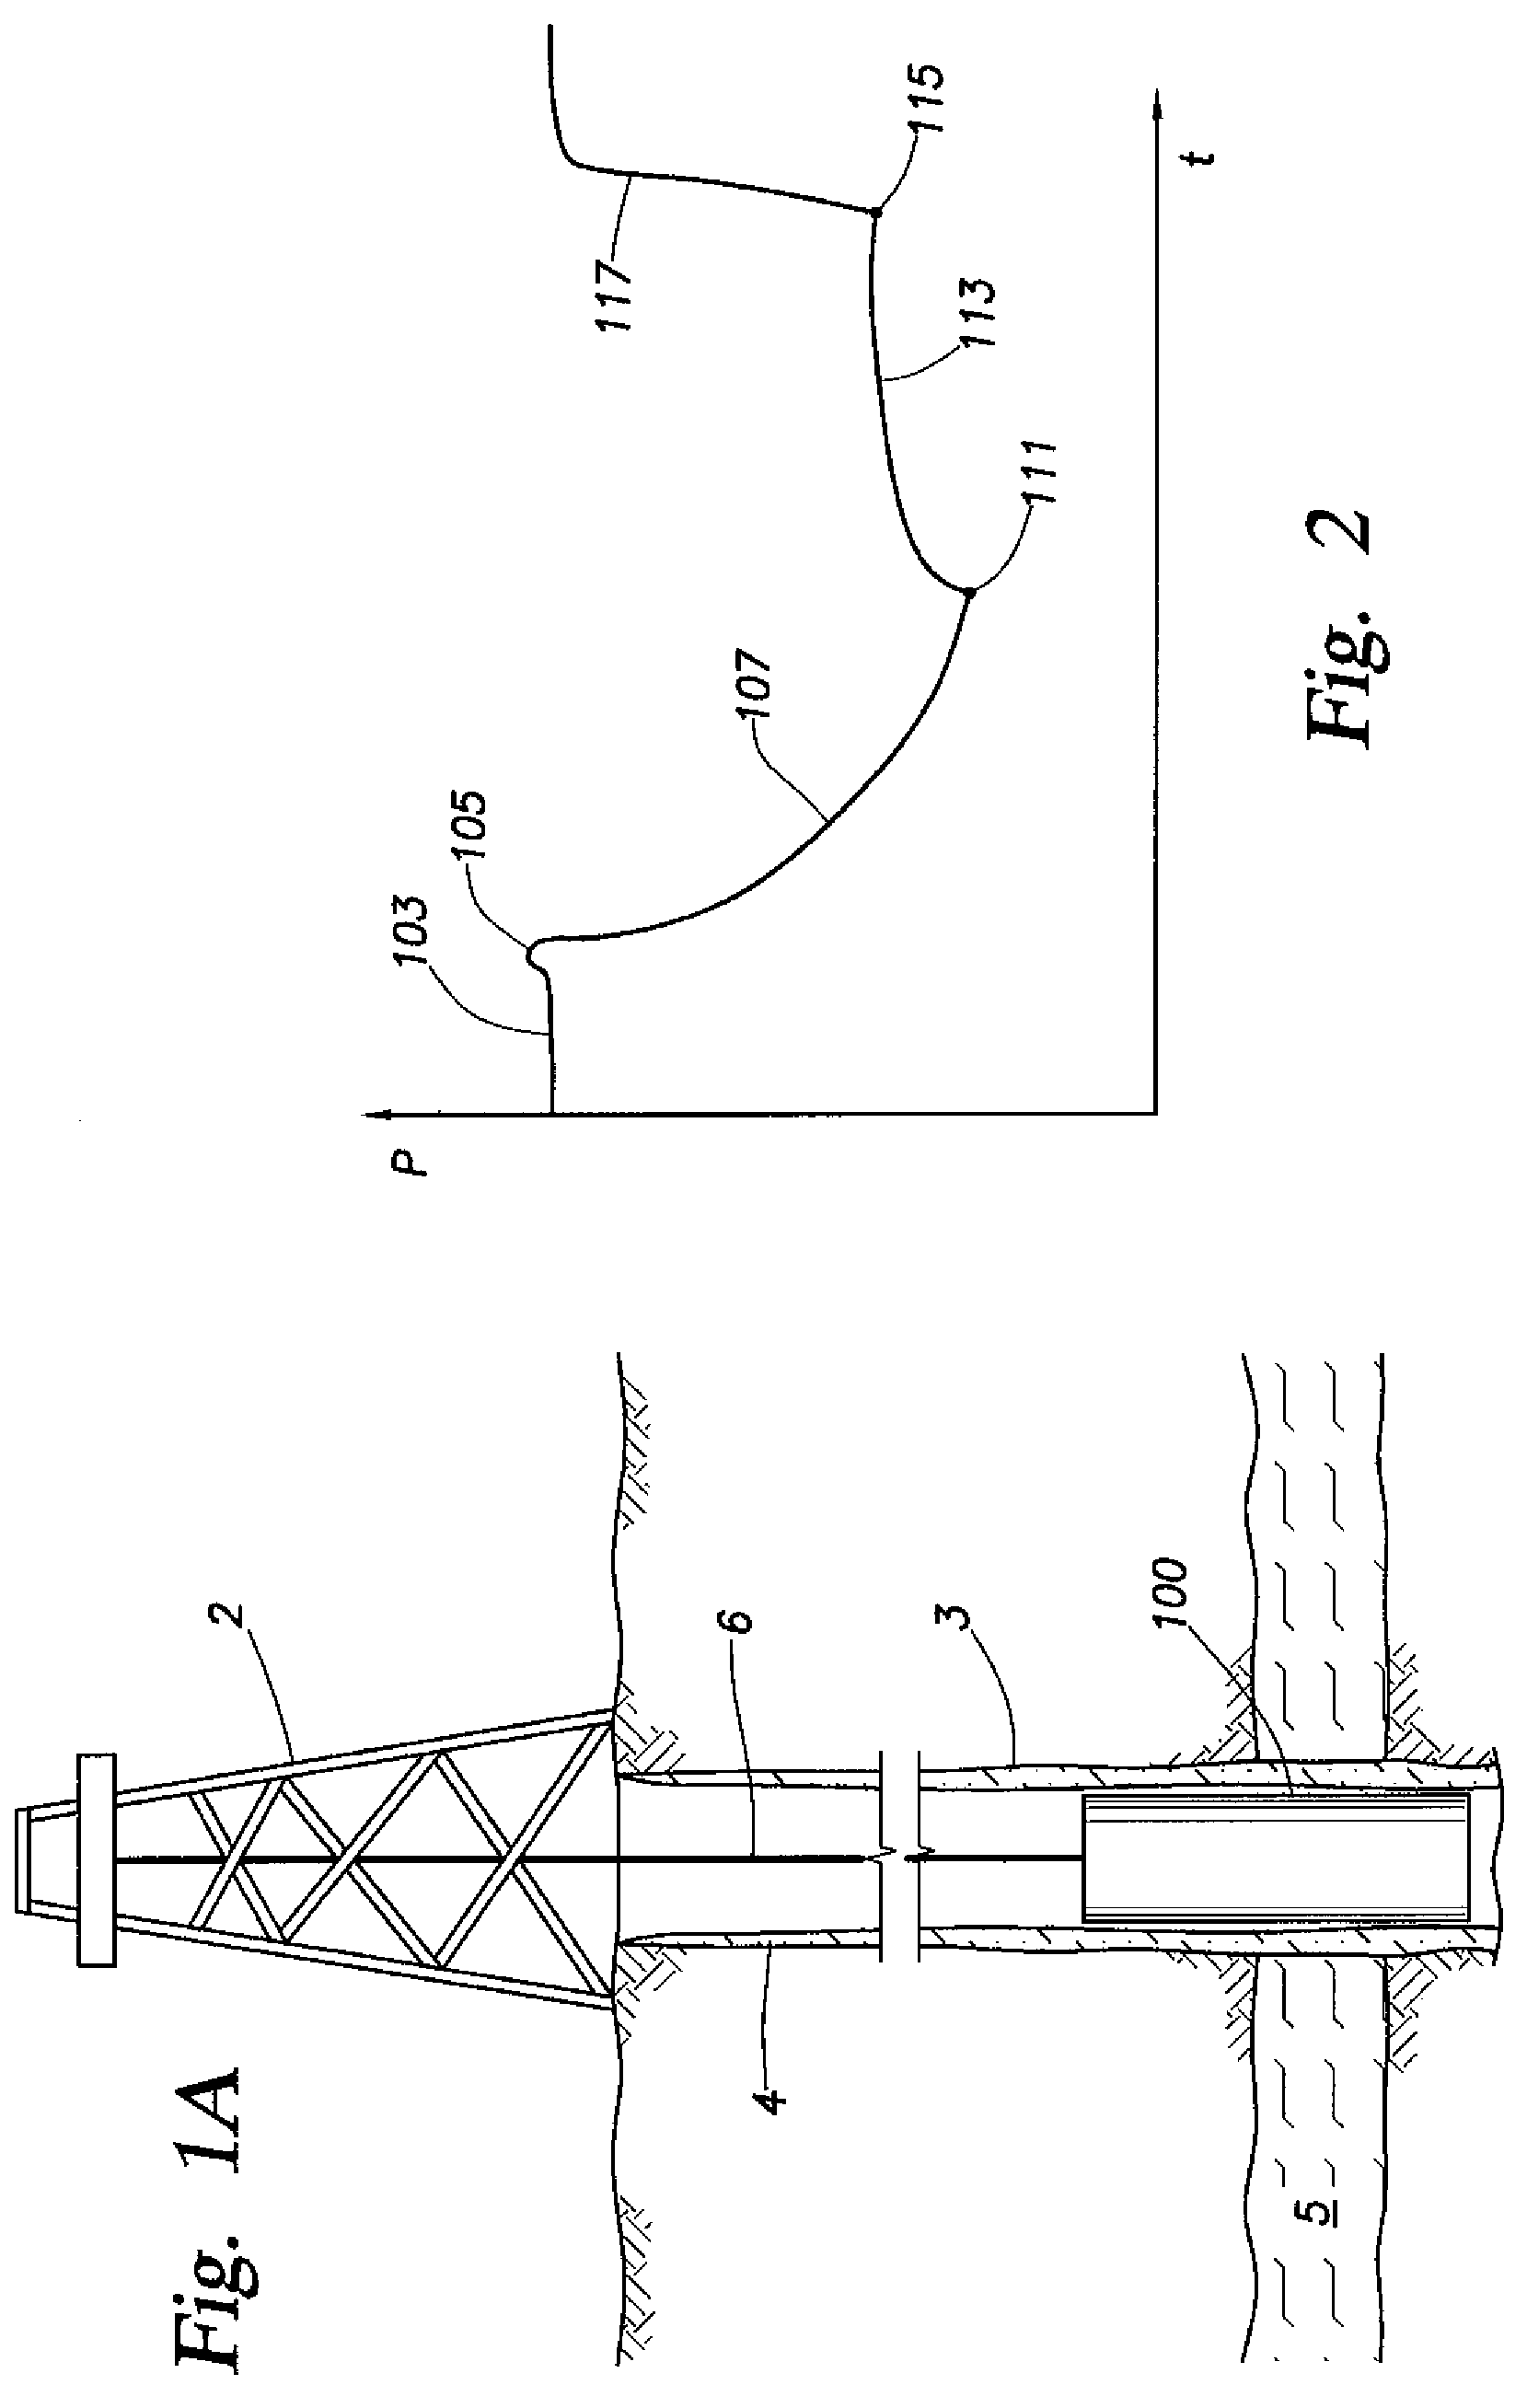 System and methods for well data compression